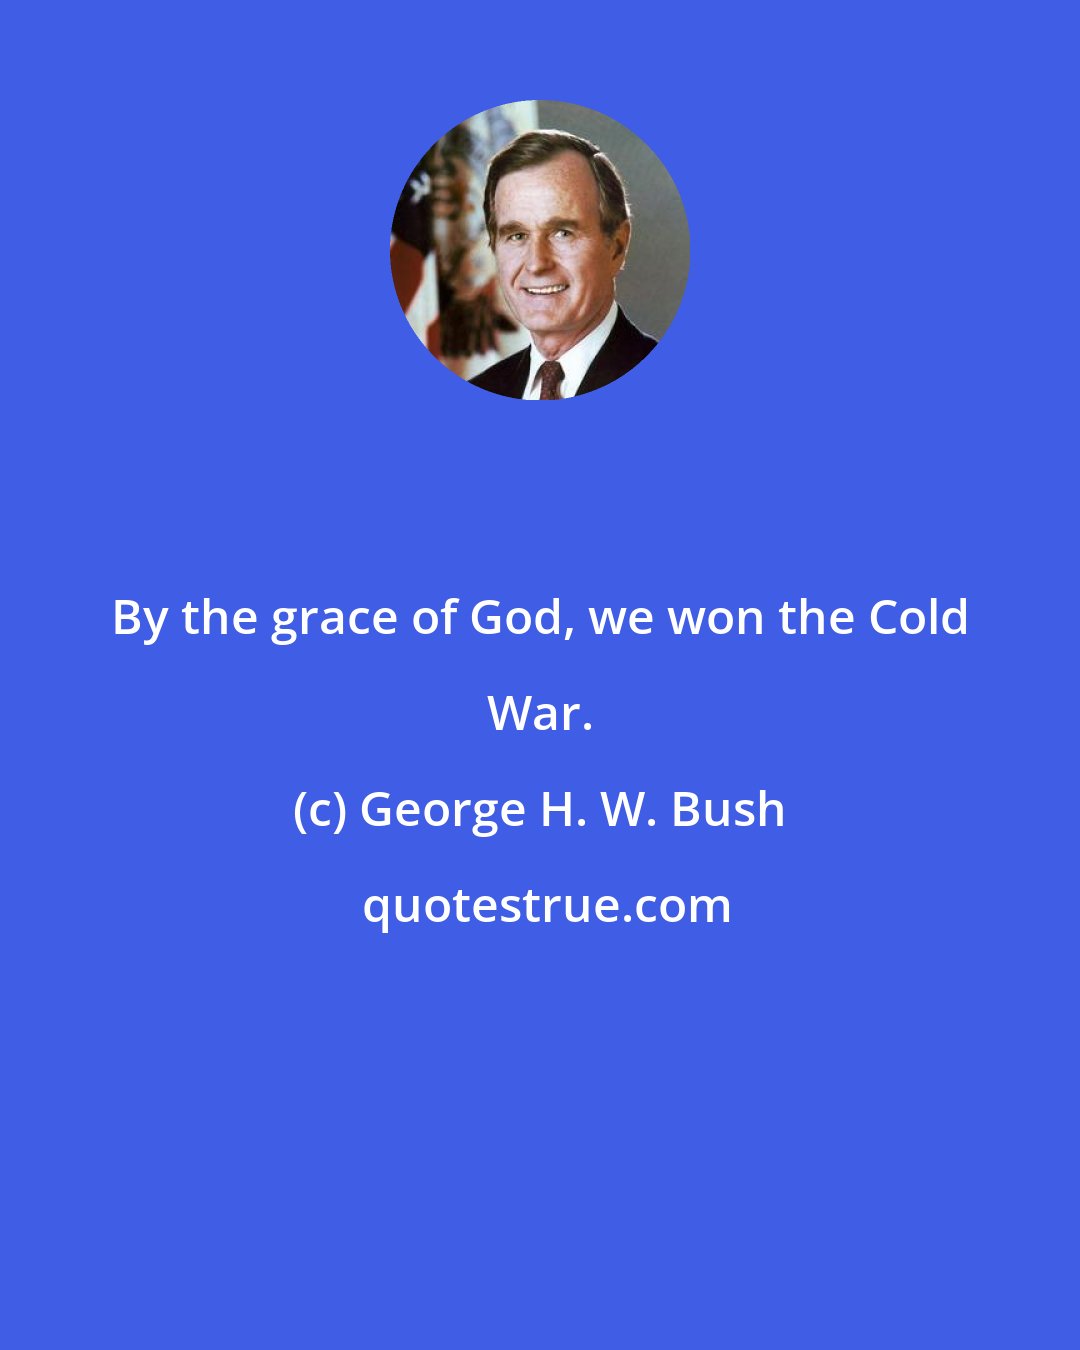 George H. W. Bush: By the grace of God, we won the Cold War.